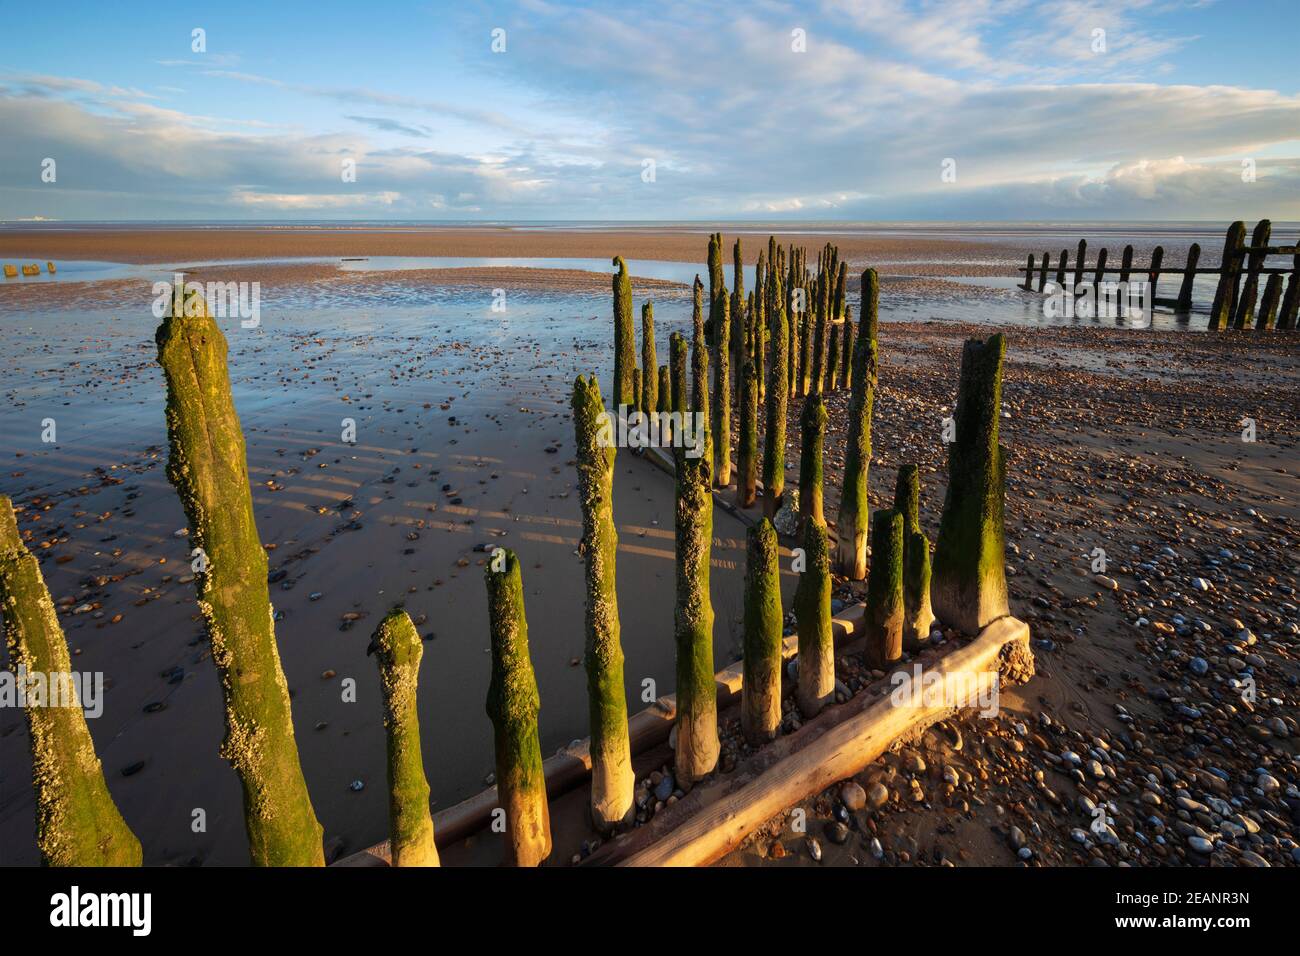 Rotting upright wooden posts of old sea defences on Winchelsea beach, Winchelsea, East Sussex, England, United Kingdom, Europe Stock Photo